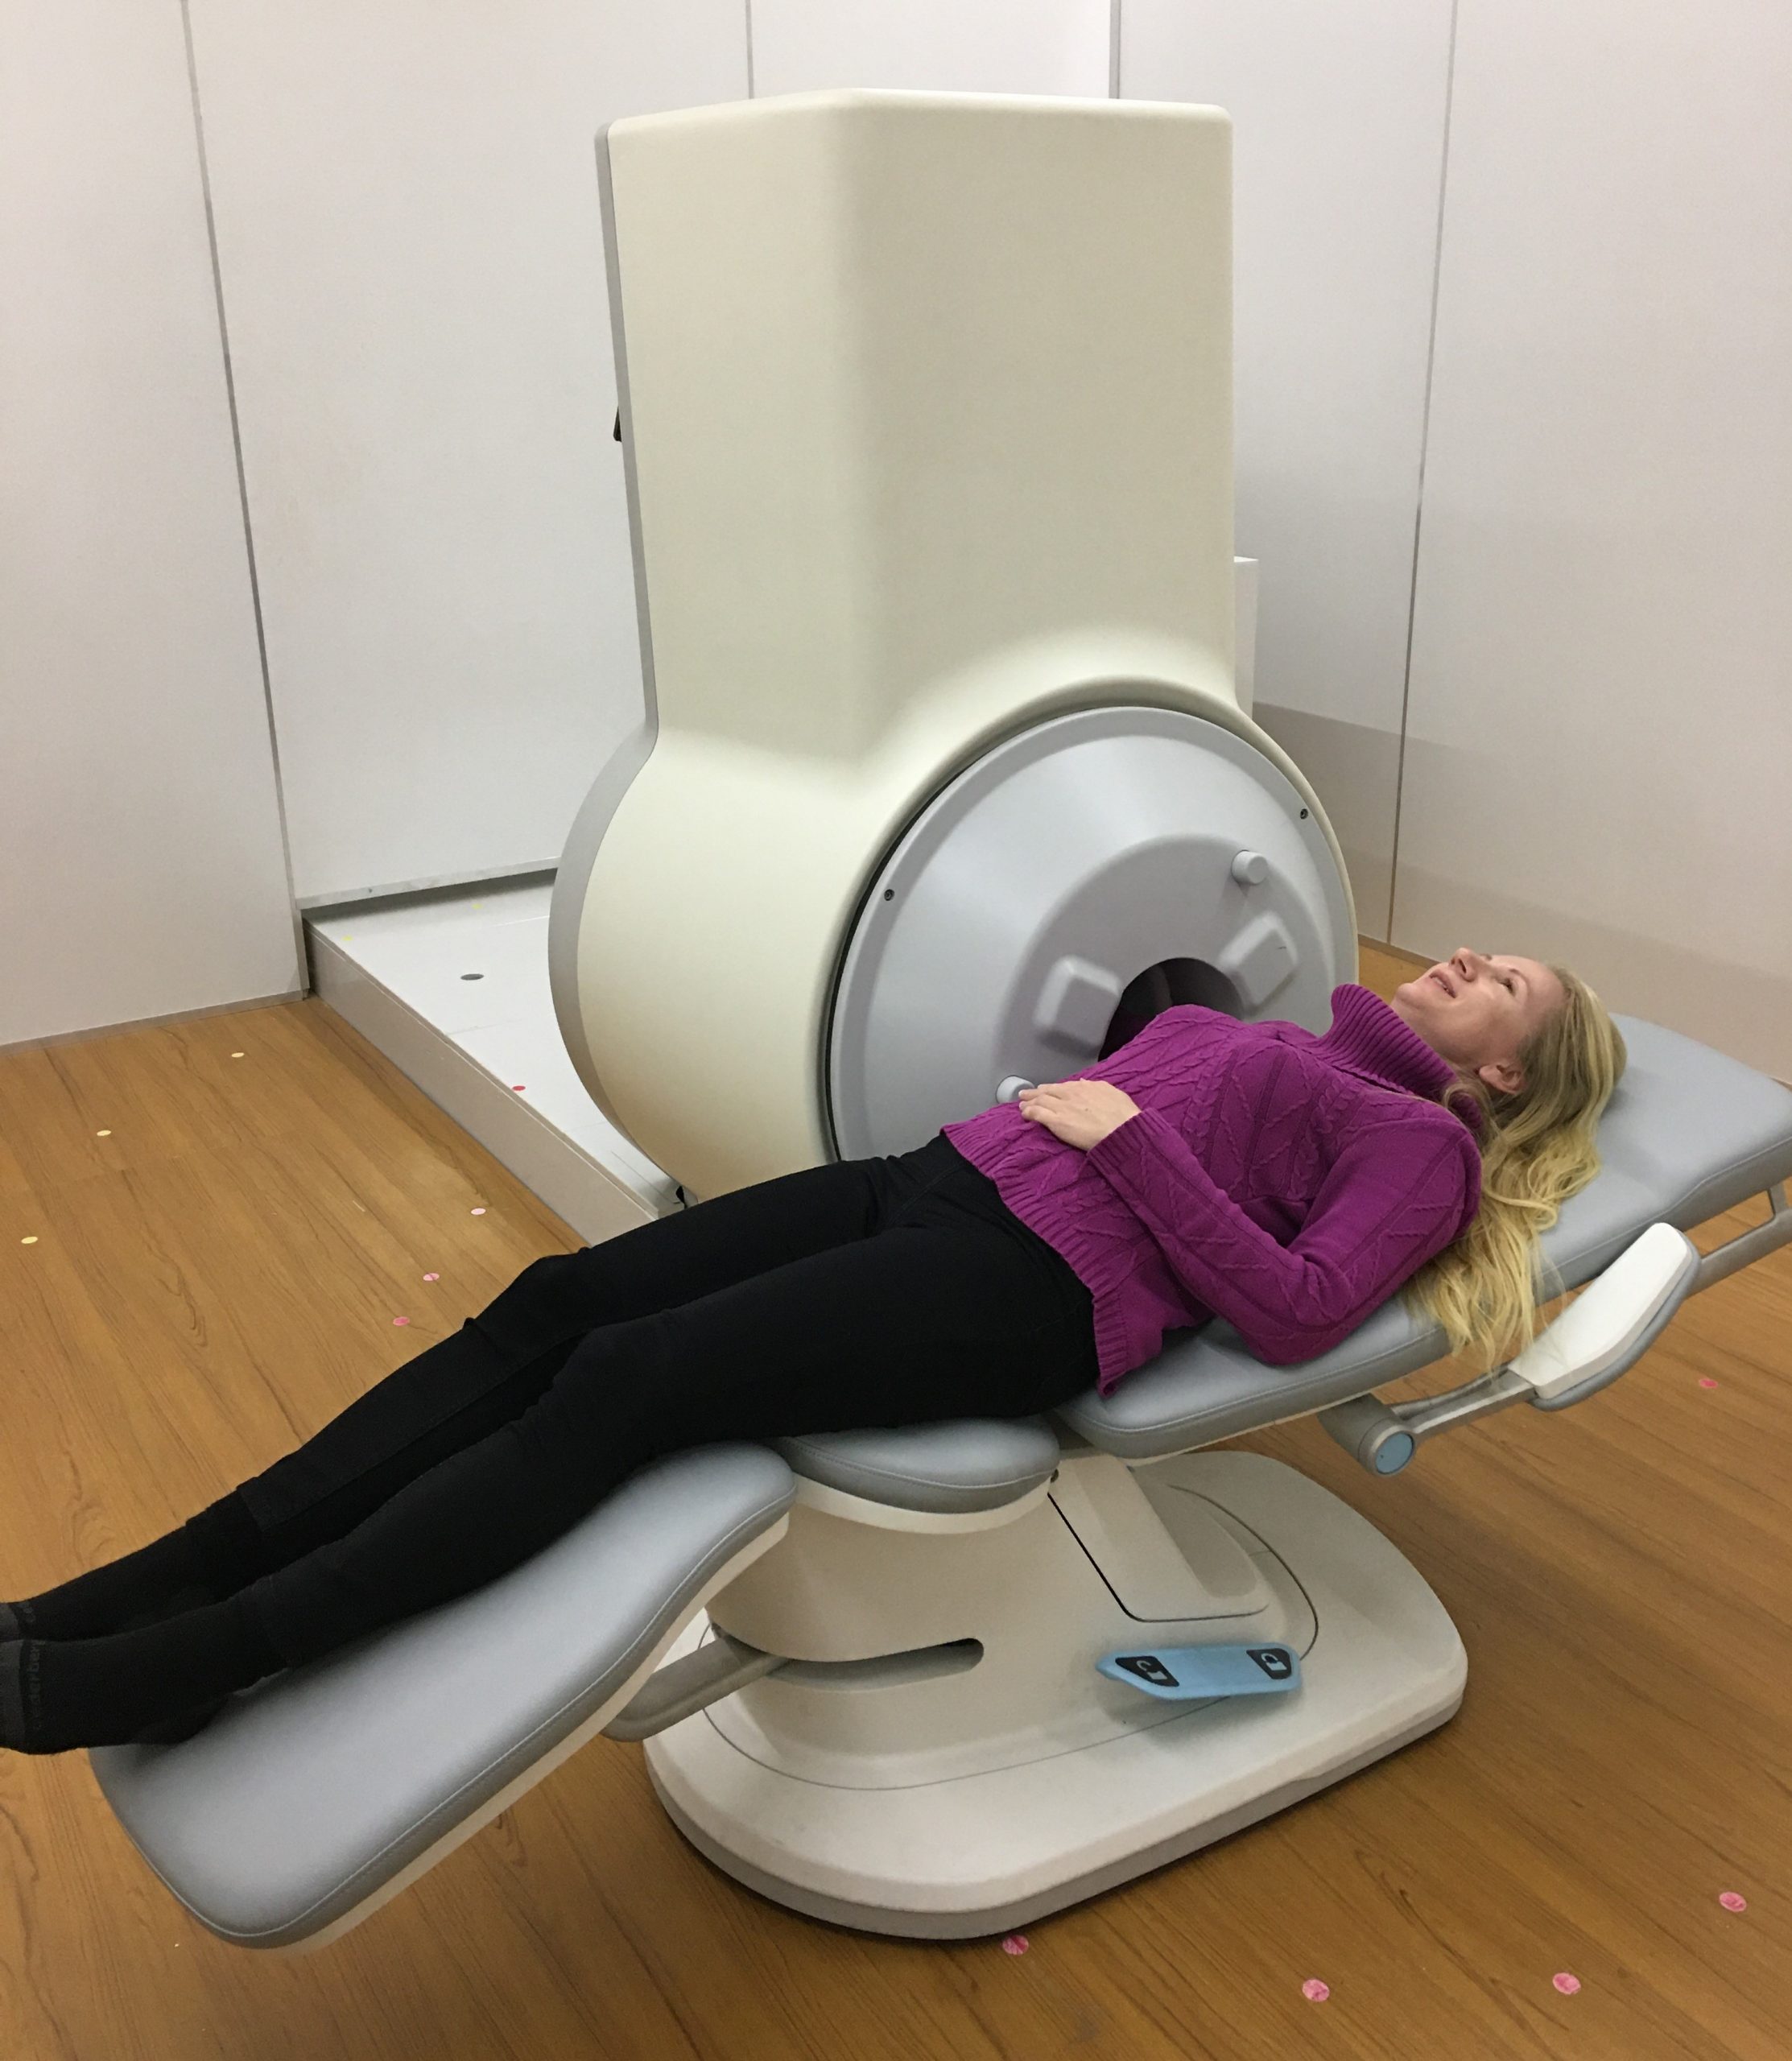 It was a pleasure to interview Magnetica CEO Duncan Stovell who produce compact ‘extremity’ Magnetic Resonance Imaging (MRI) scanners which collect detailed, high quality images from elbow to hand and knee to foot. Because their Magnetica MRI systems are notably smaller and lighter weight, they can be installed in a greater range of locations, from regional hubs, mobile clinics and specialists’ rooms.